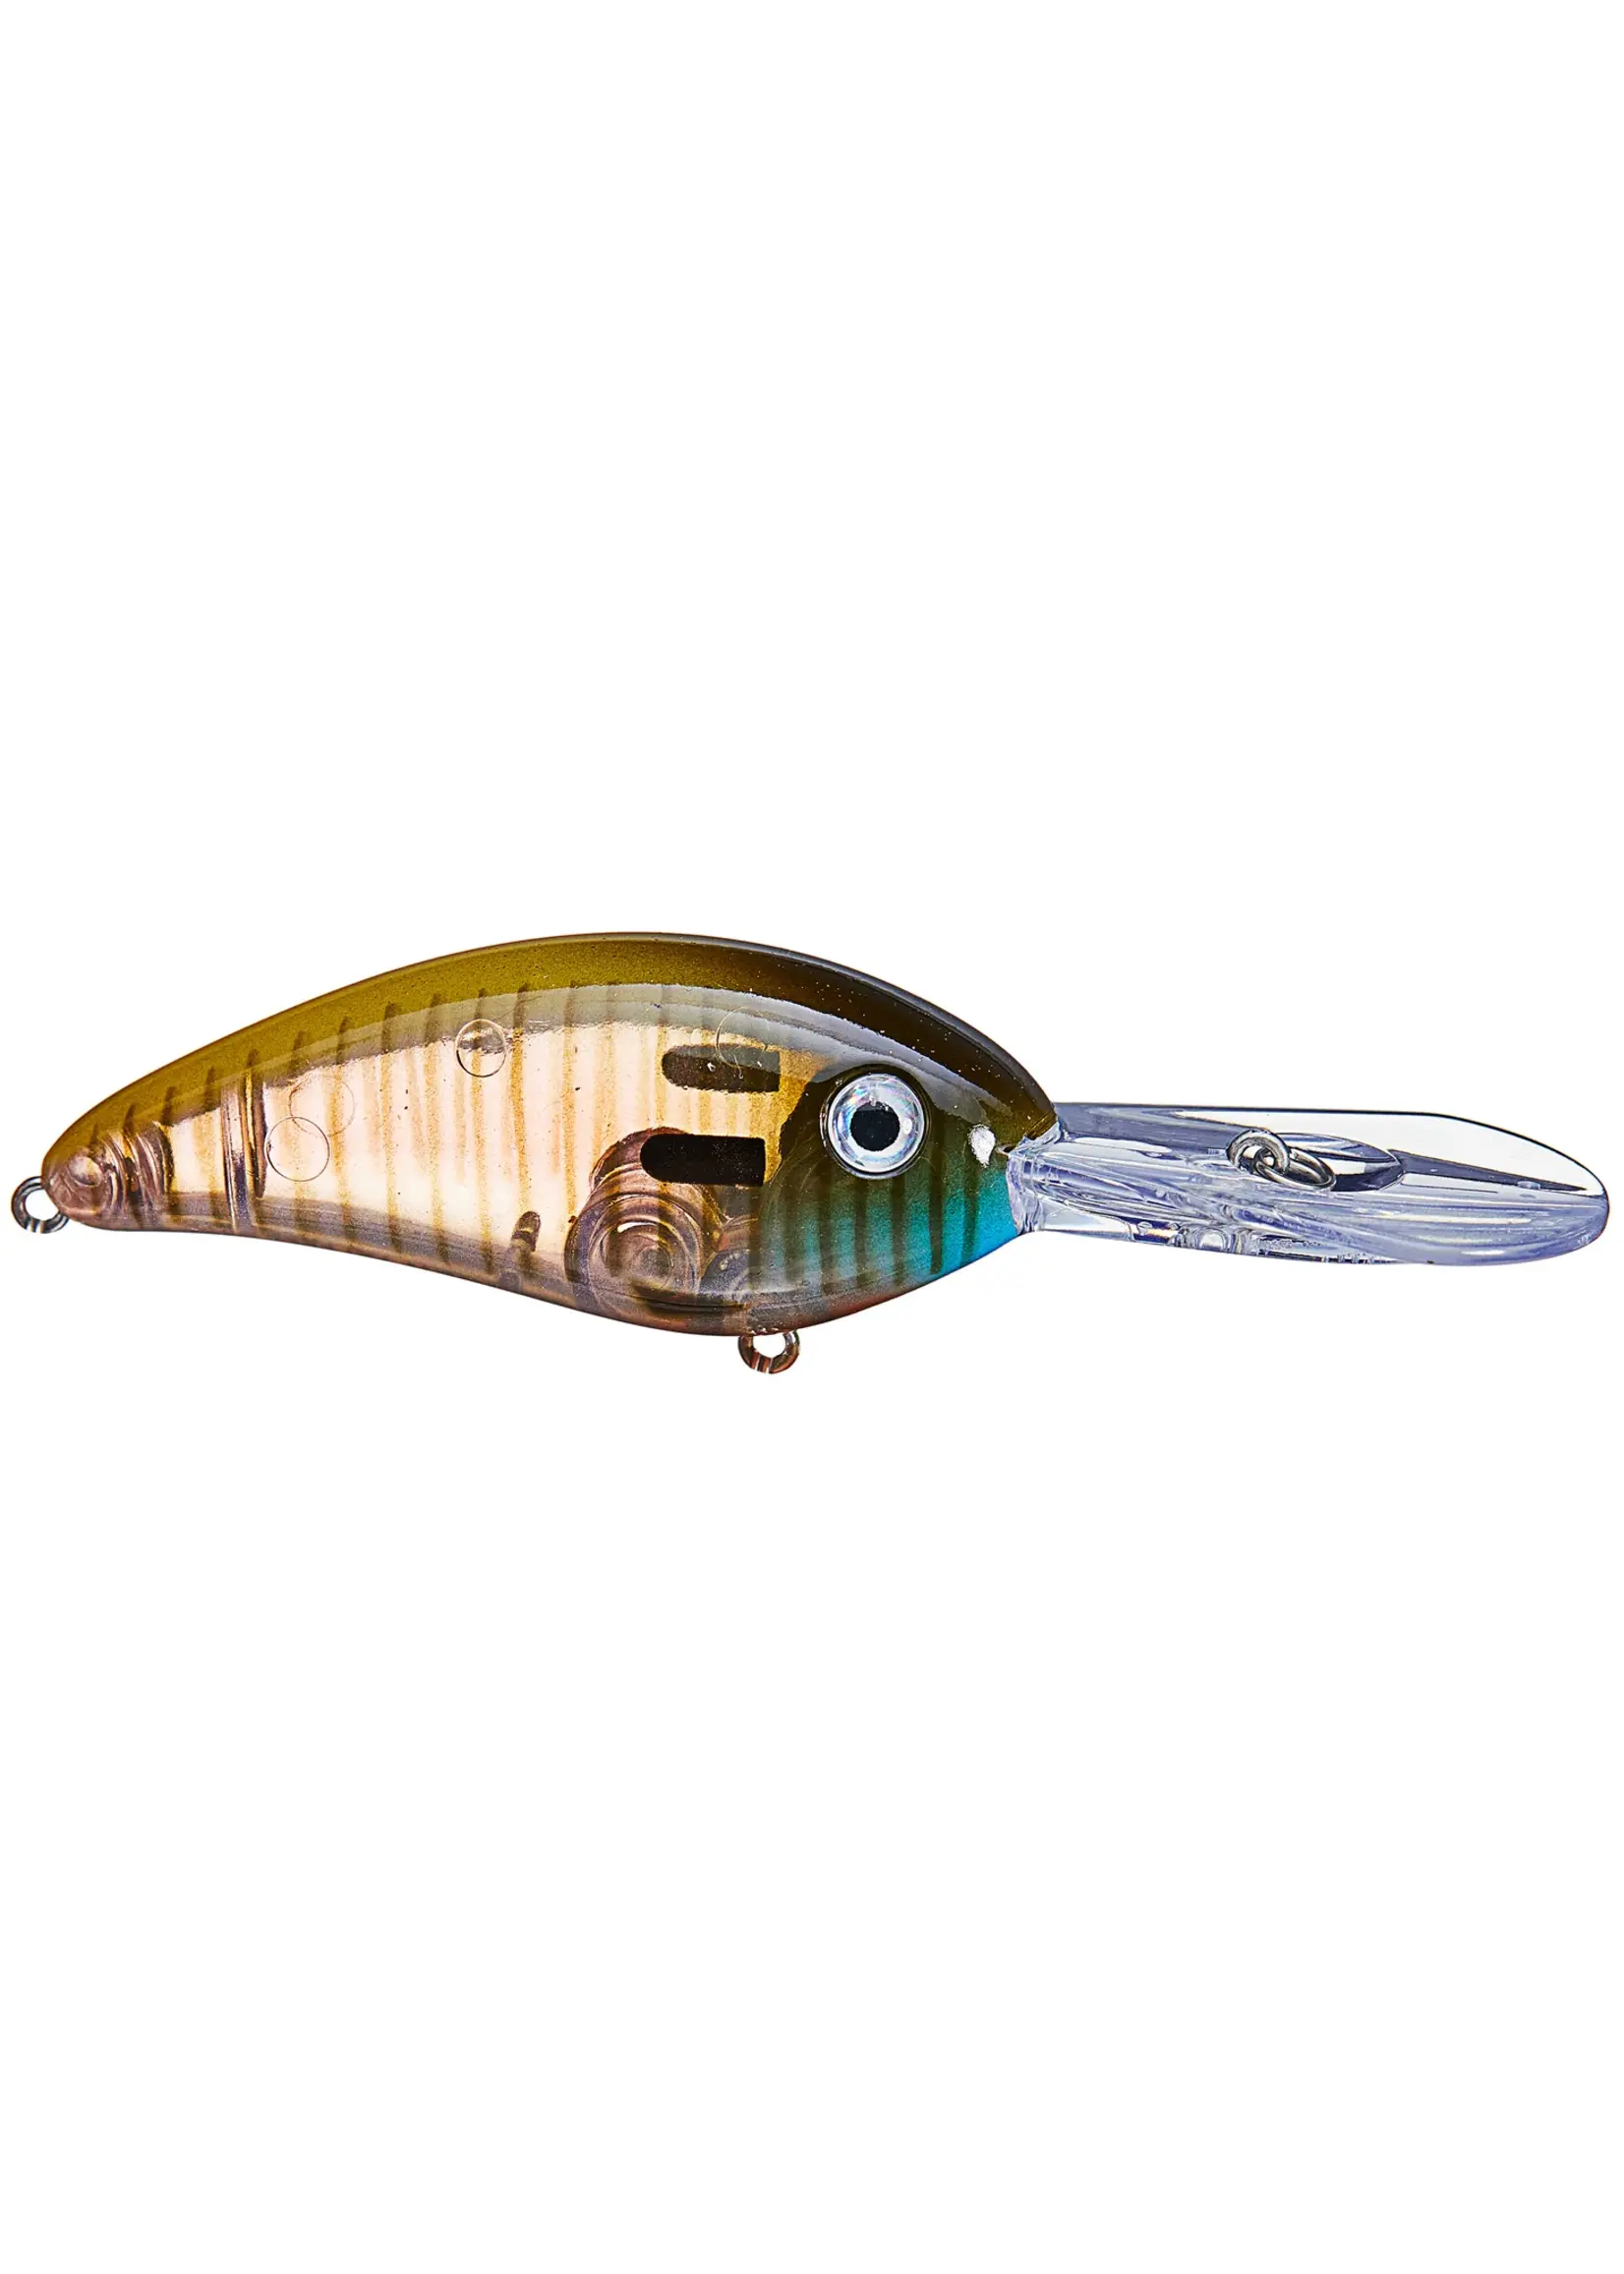 Bomber Fat Free Shad Jr. Electric Shad